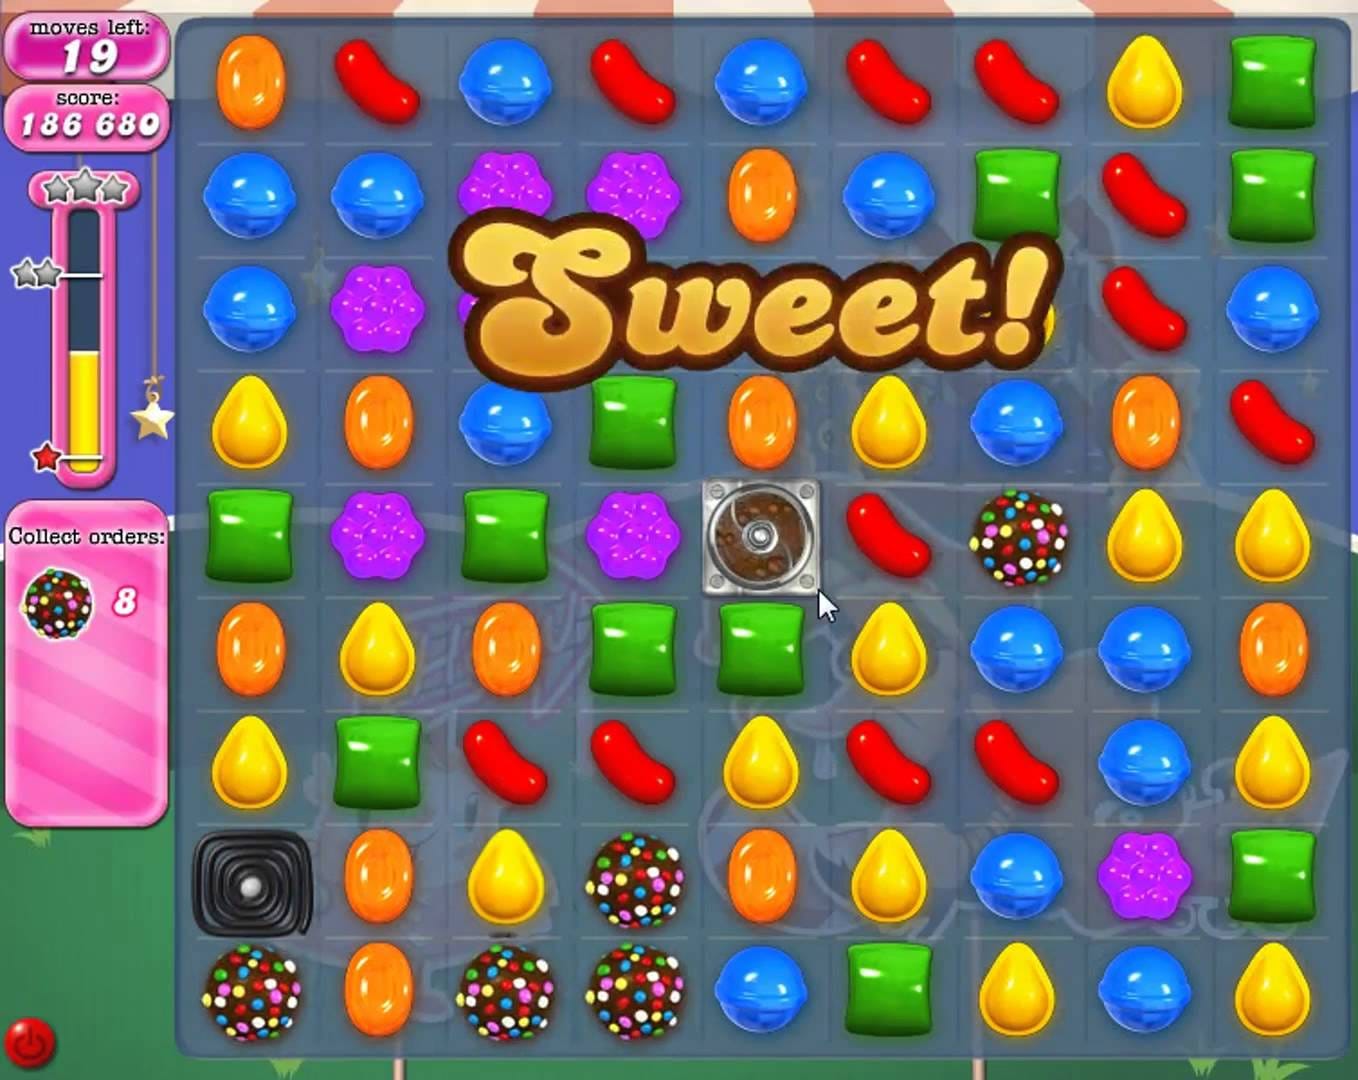 Candy Crush and Real Life. What a simple game tells you about your